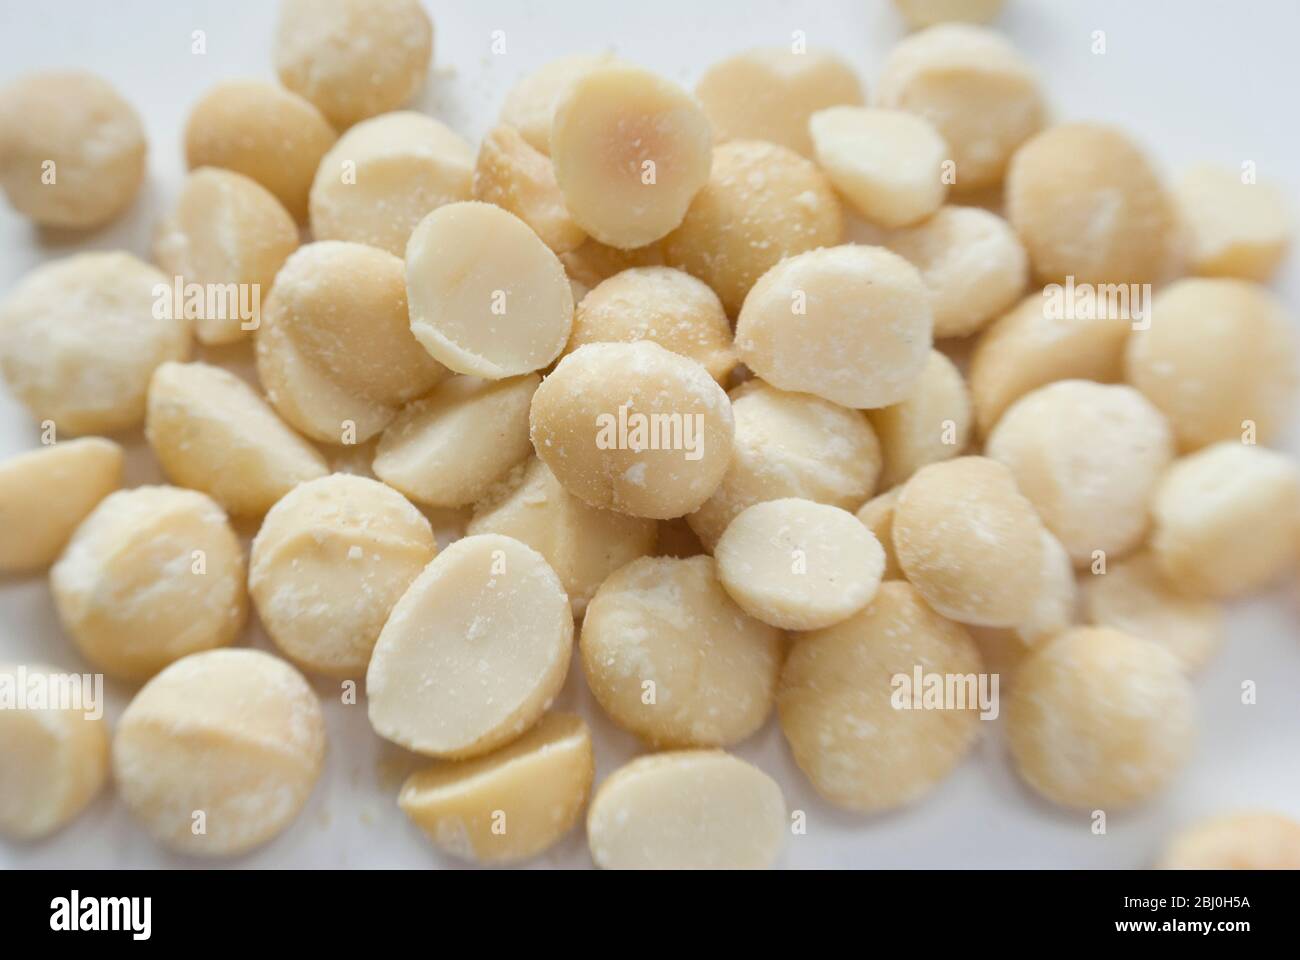 Shelled dry roasted macadamia nuts, on white surface - Stock Photo